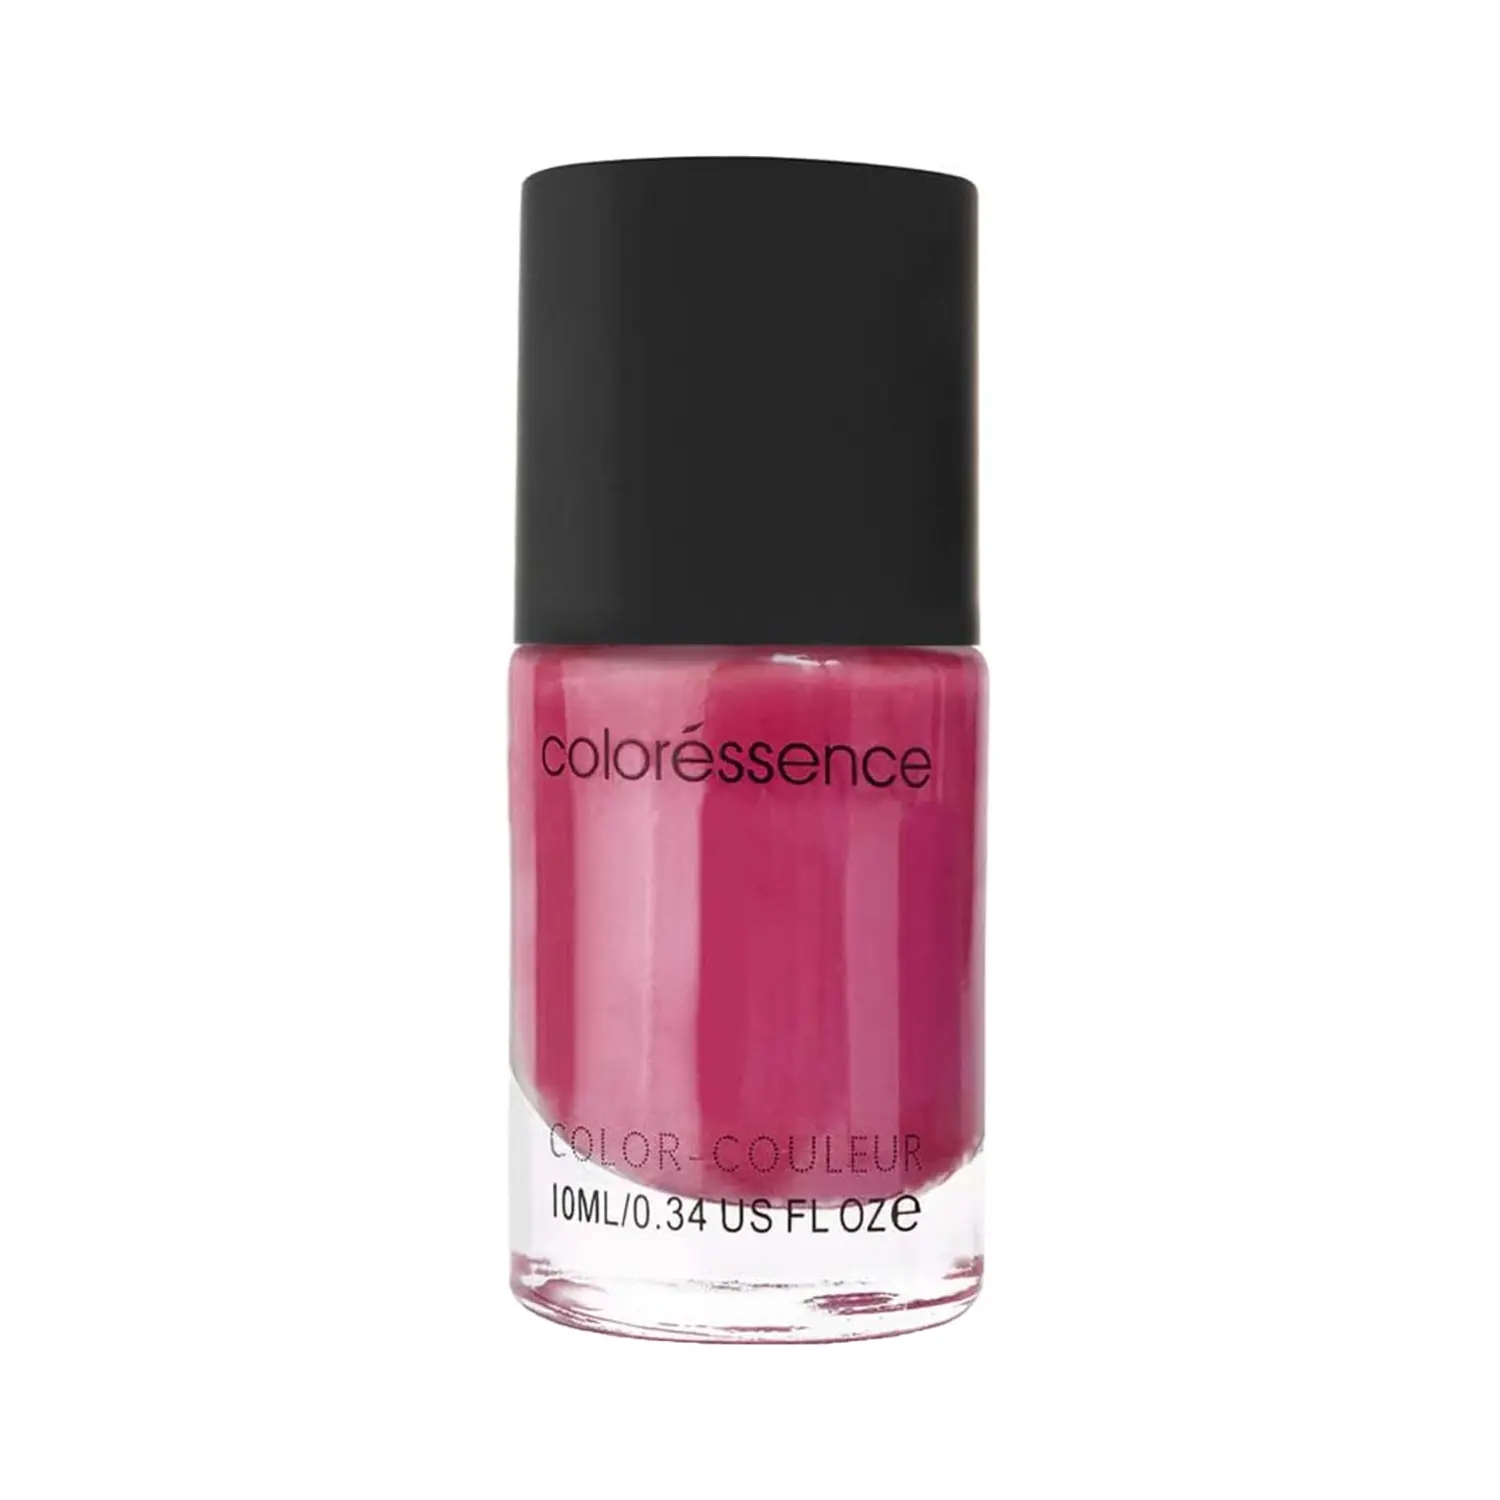 Coloressence Regular Nail Paint (Punch) Price - Buy Online at ₹152 in India